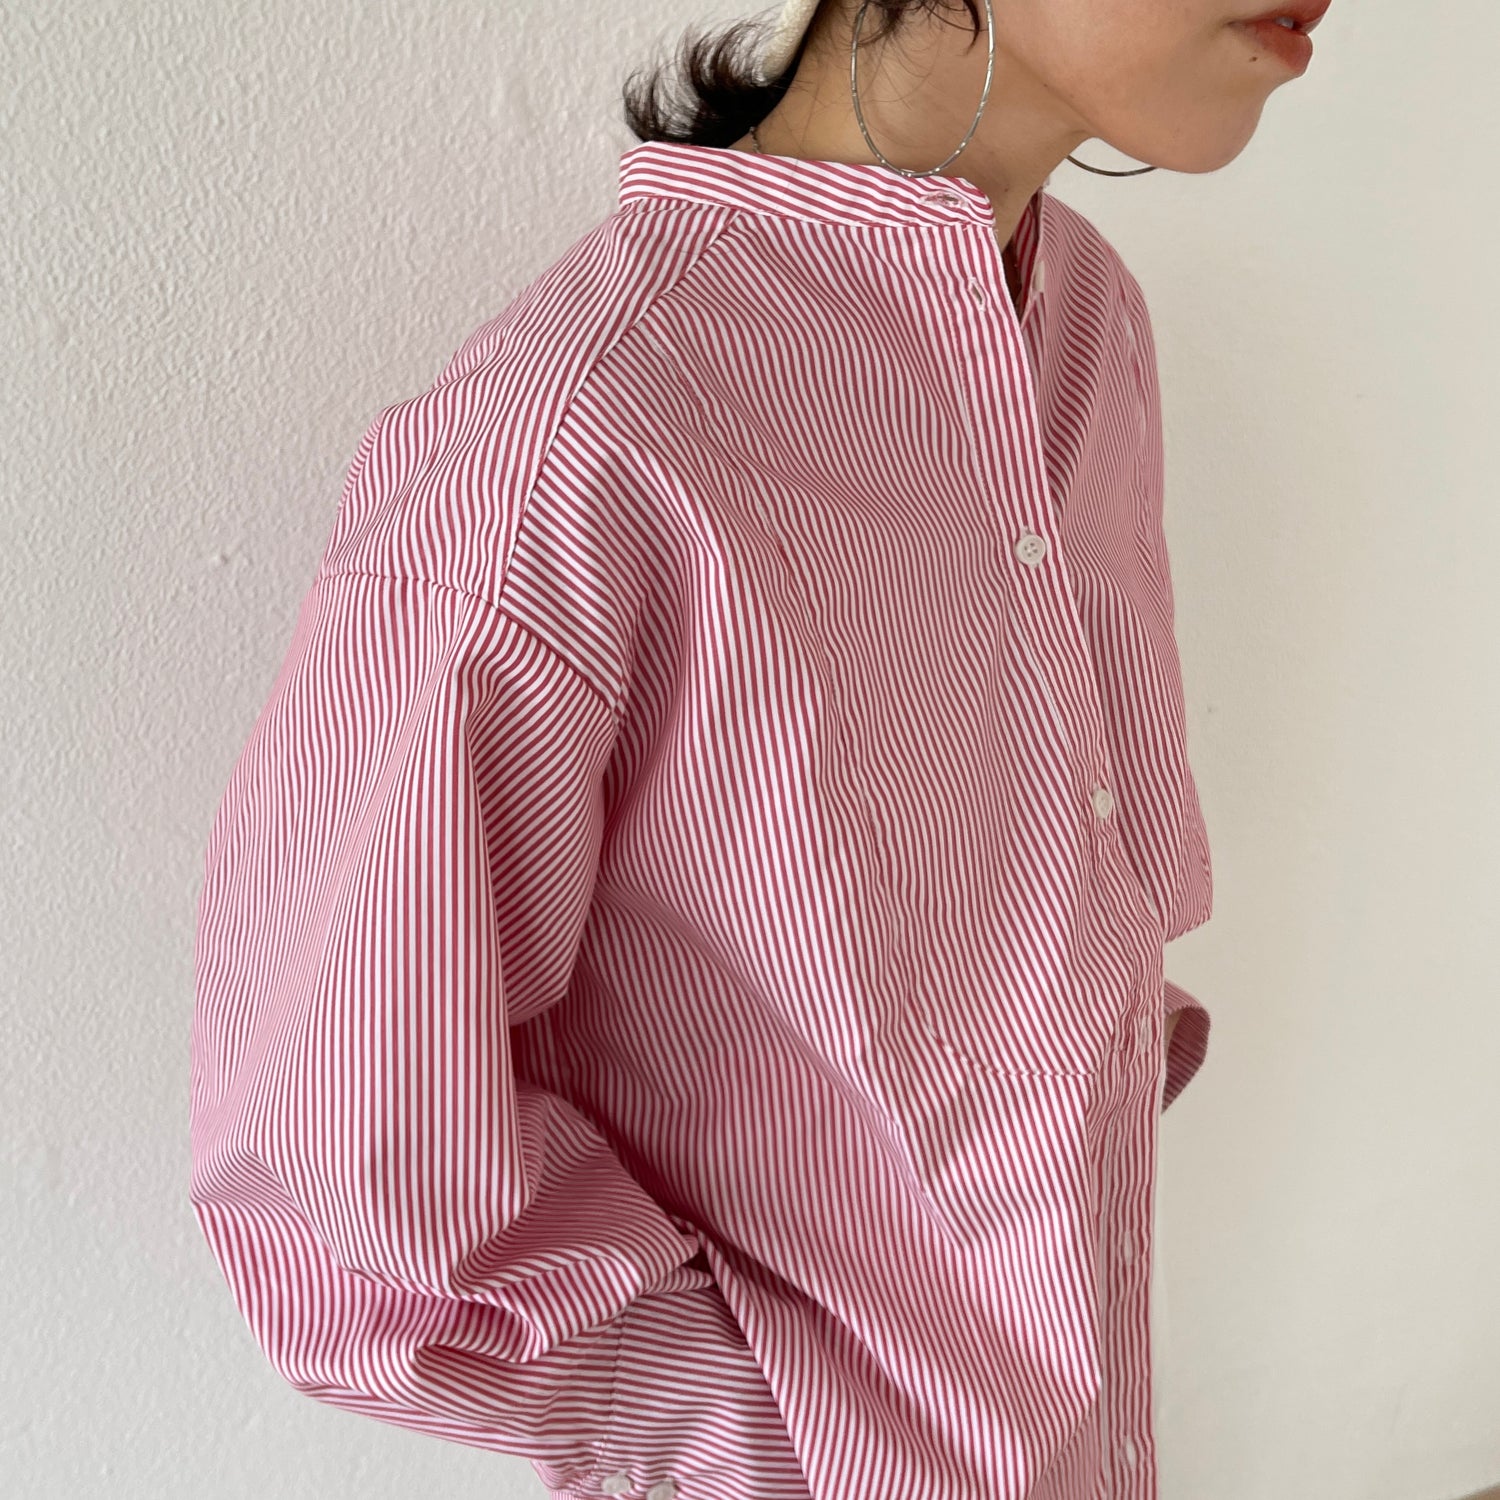 over size stripe shirt / red